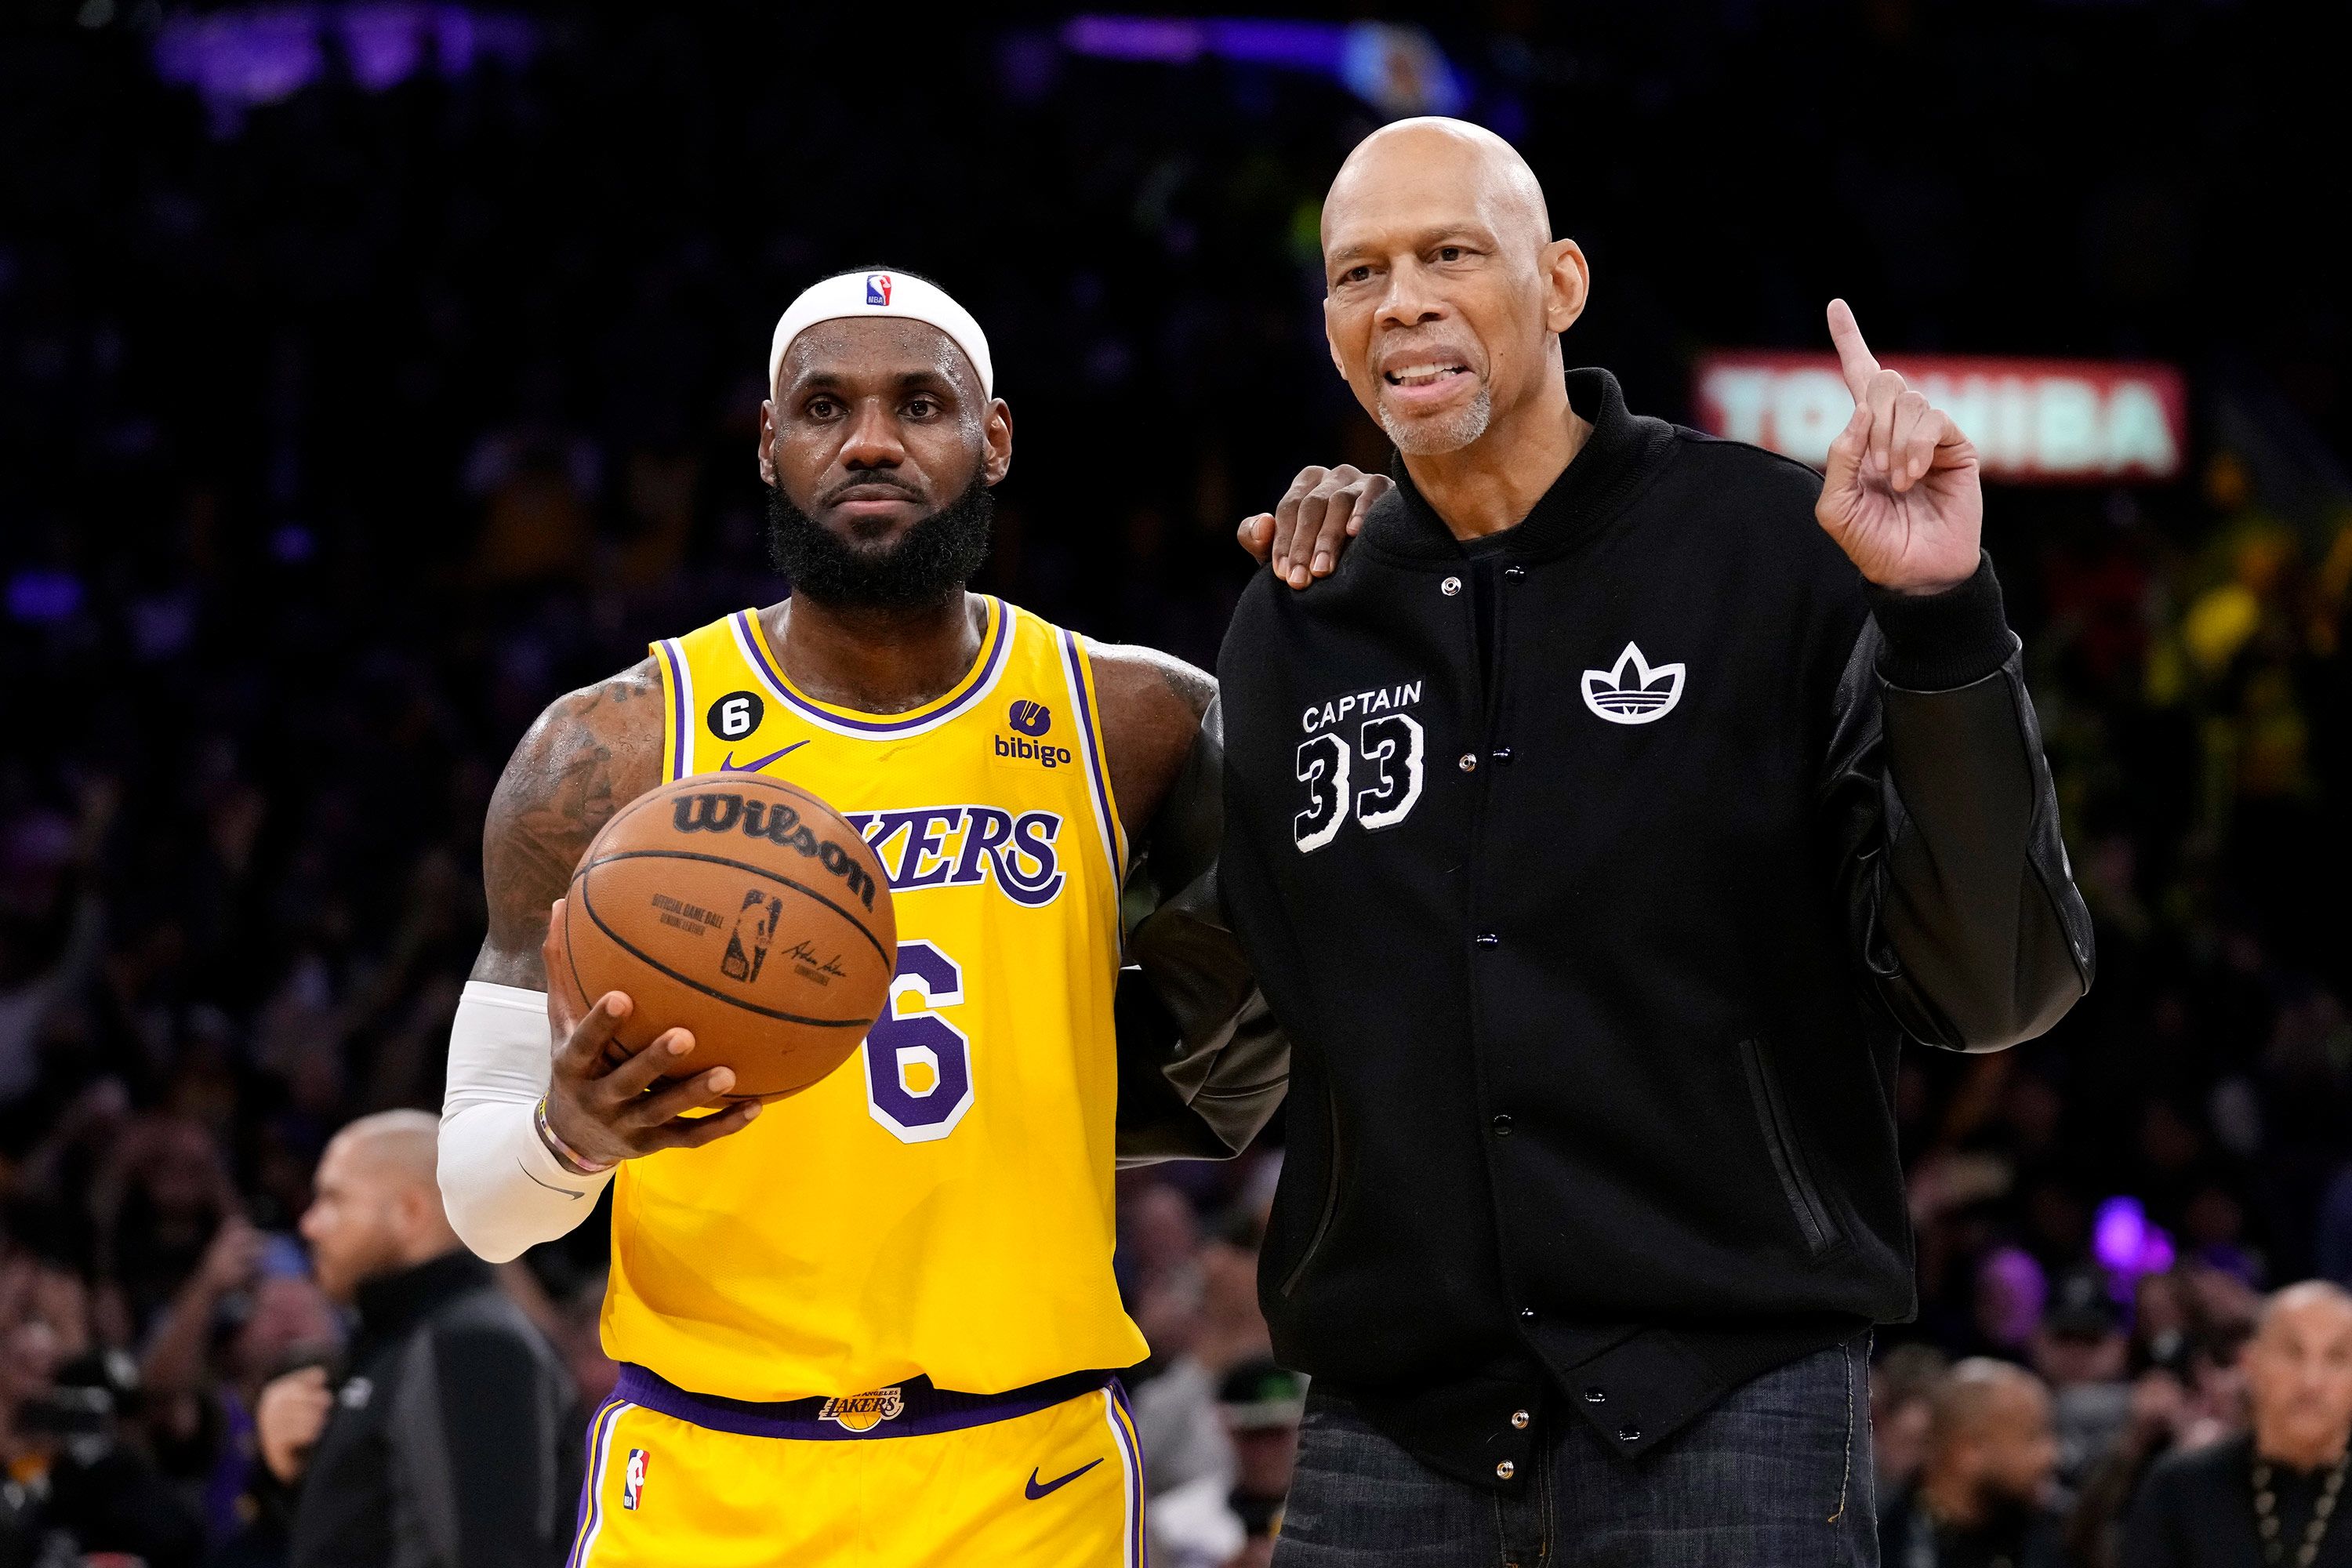 James Worthy looking for more leadership from LeBron James